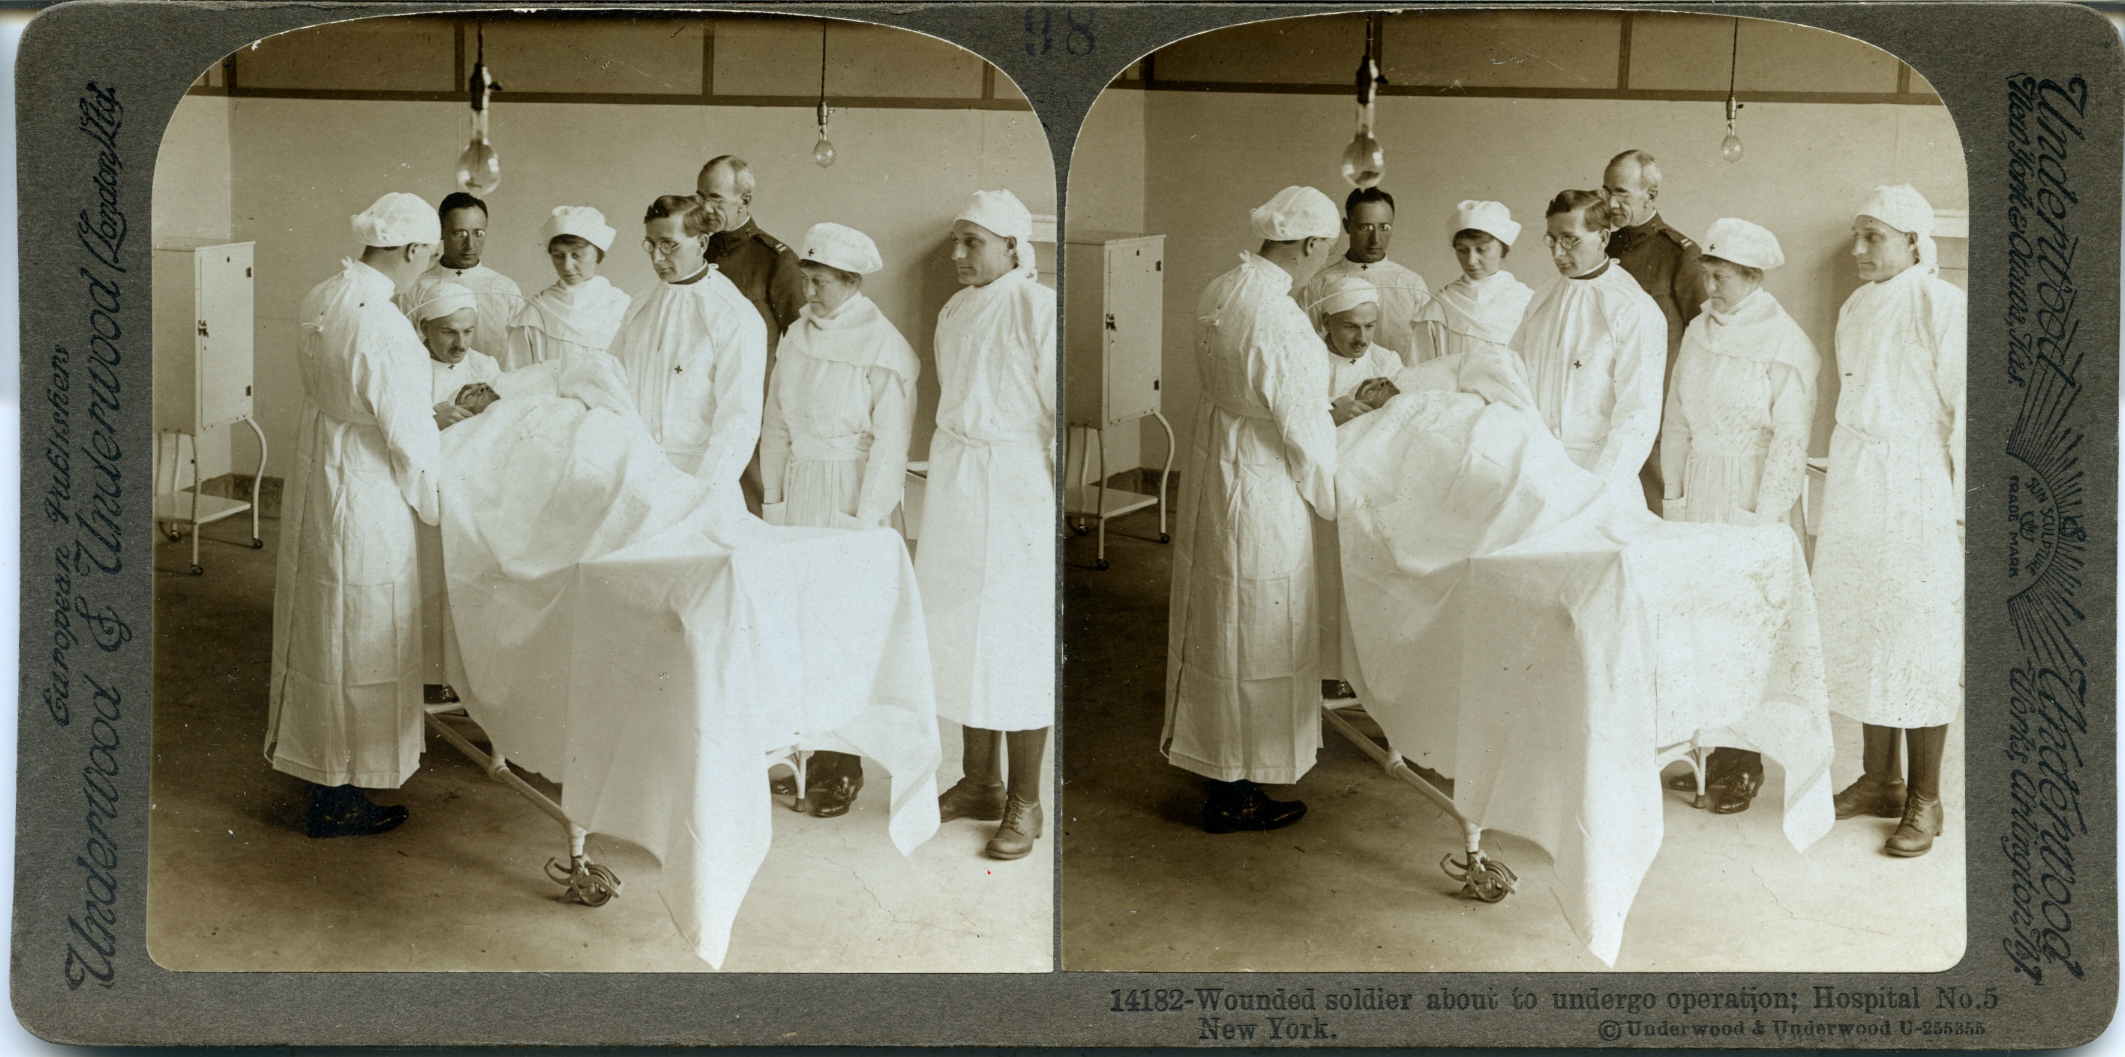 Wounded Soldier About to Undergo Operation; Hospital No. 5, New York